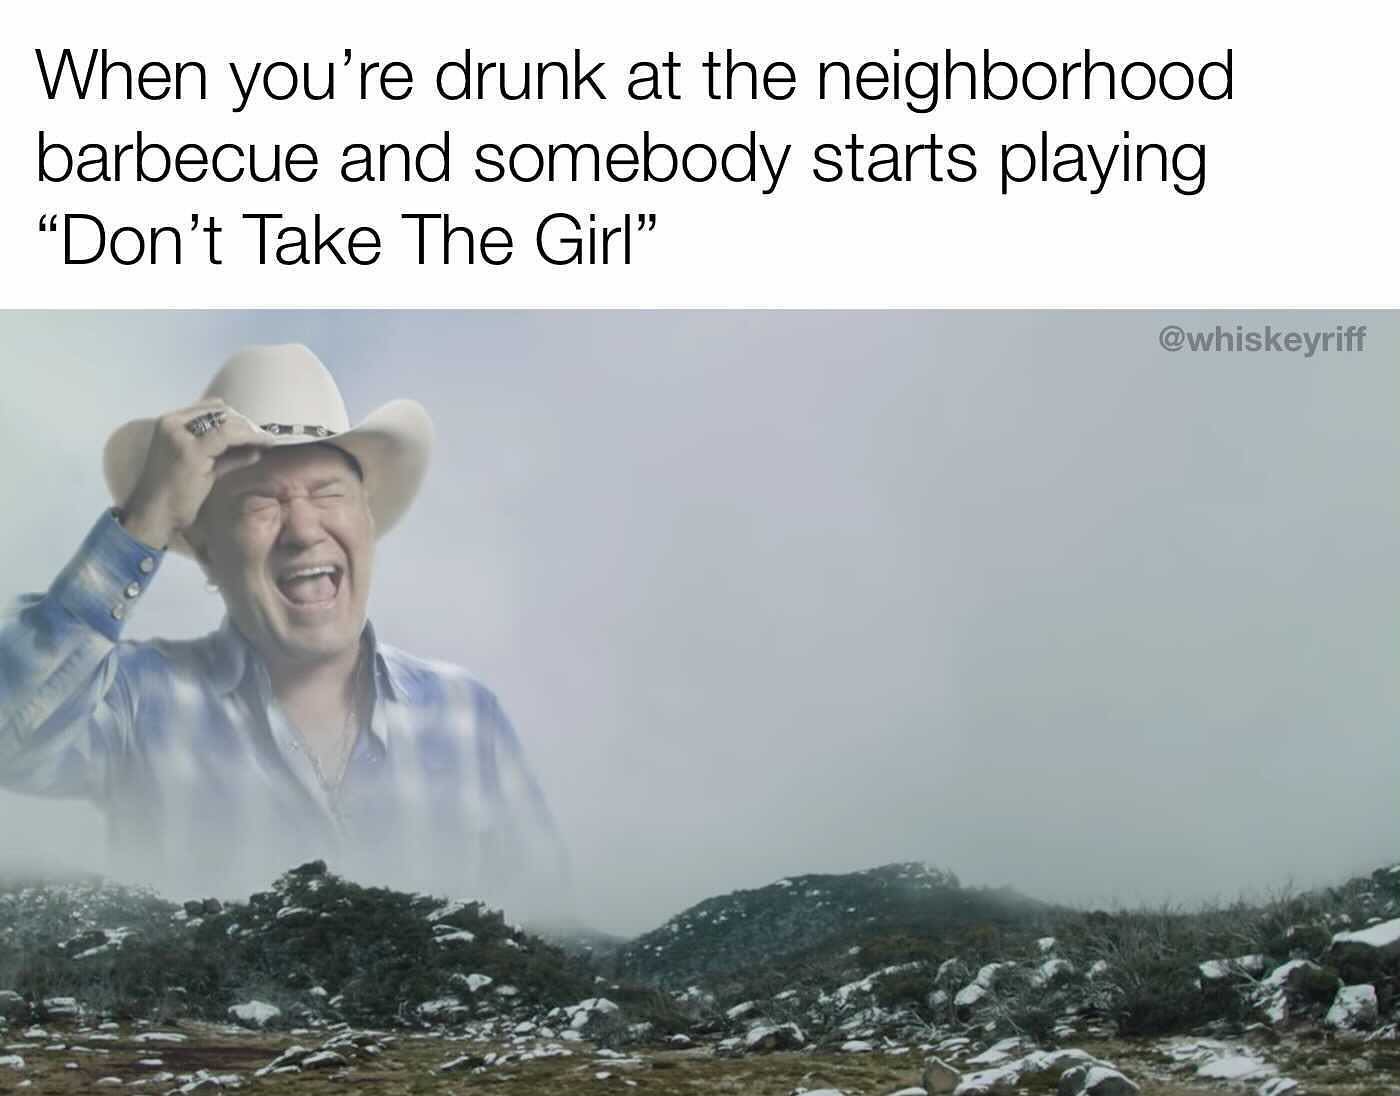 redneck memes and pics - screaming cowboy meme - When you're drunk at the neighborhood barbecue and somebody starts playing "Don't Take The Girl"